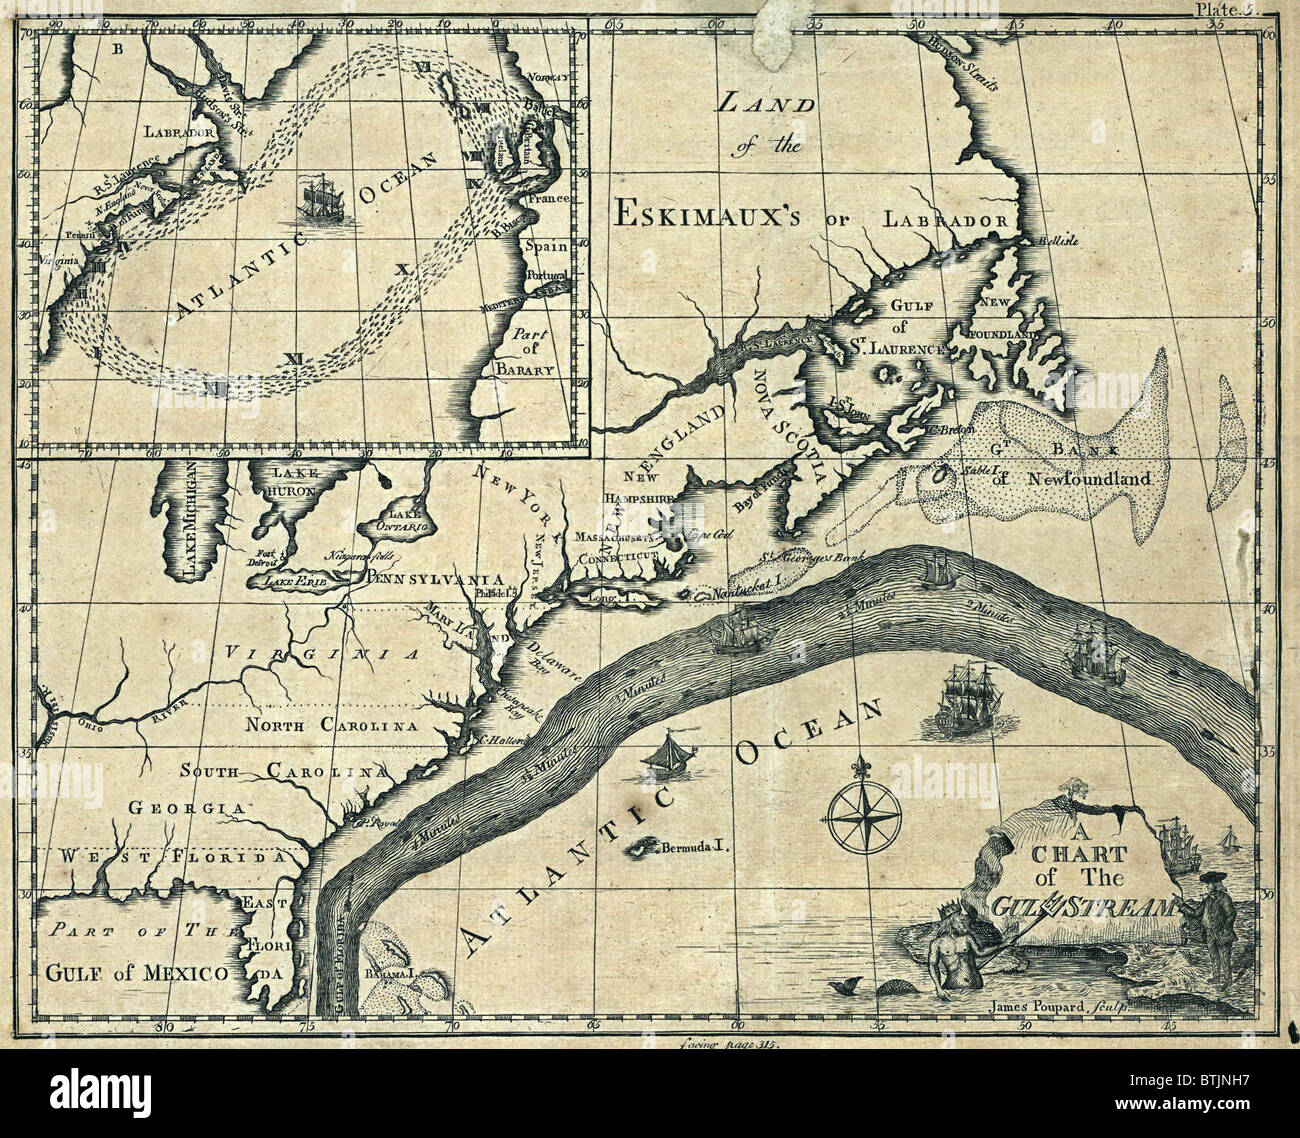 1786 chart of the Gulf Stream in the Atlantic Ocean. Stock Photo